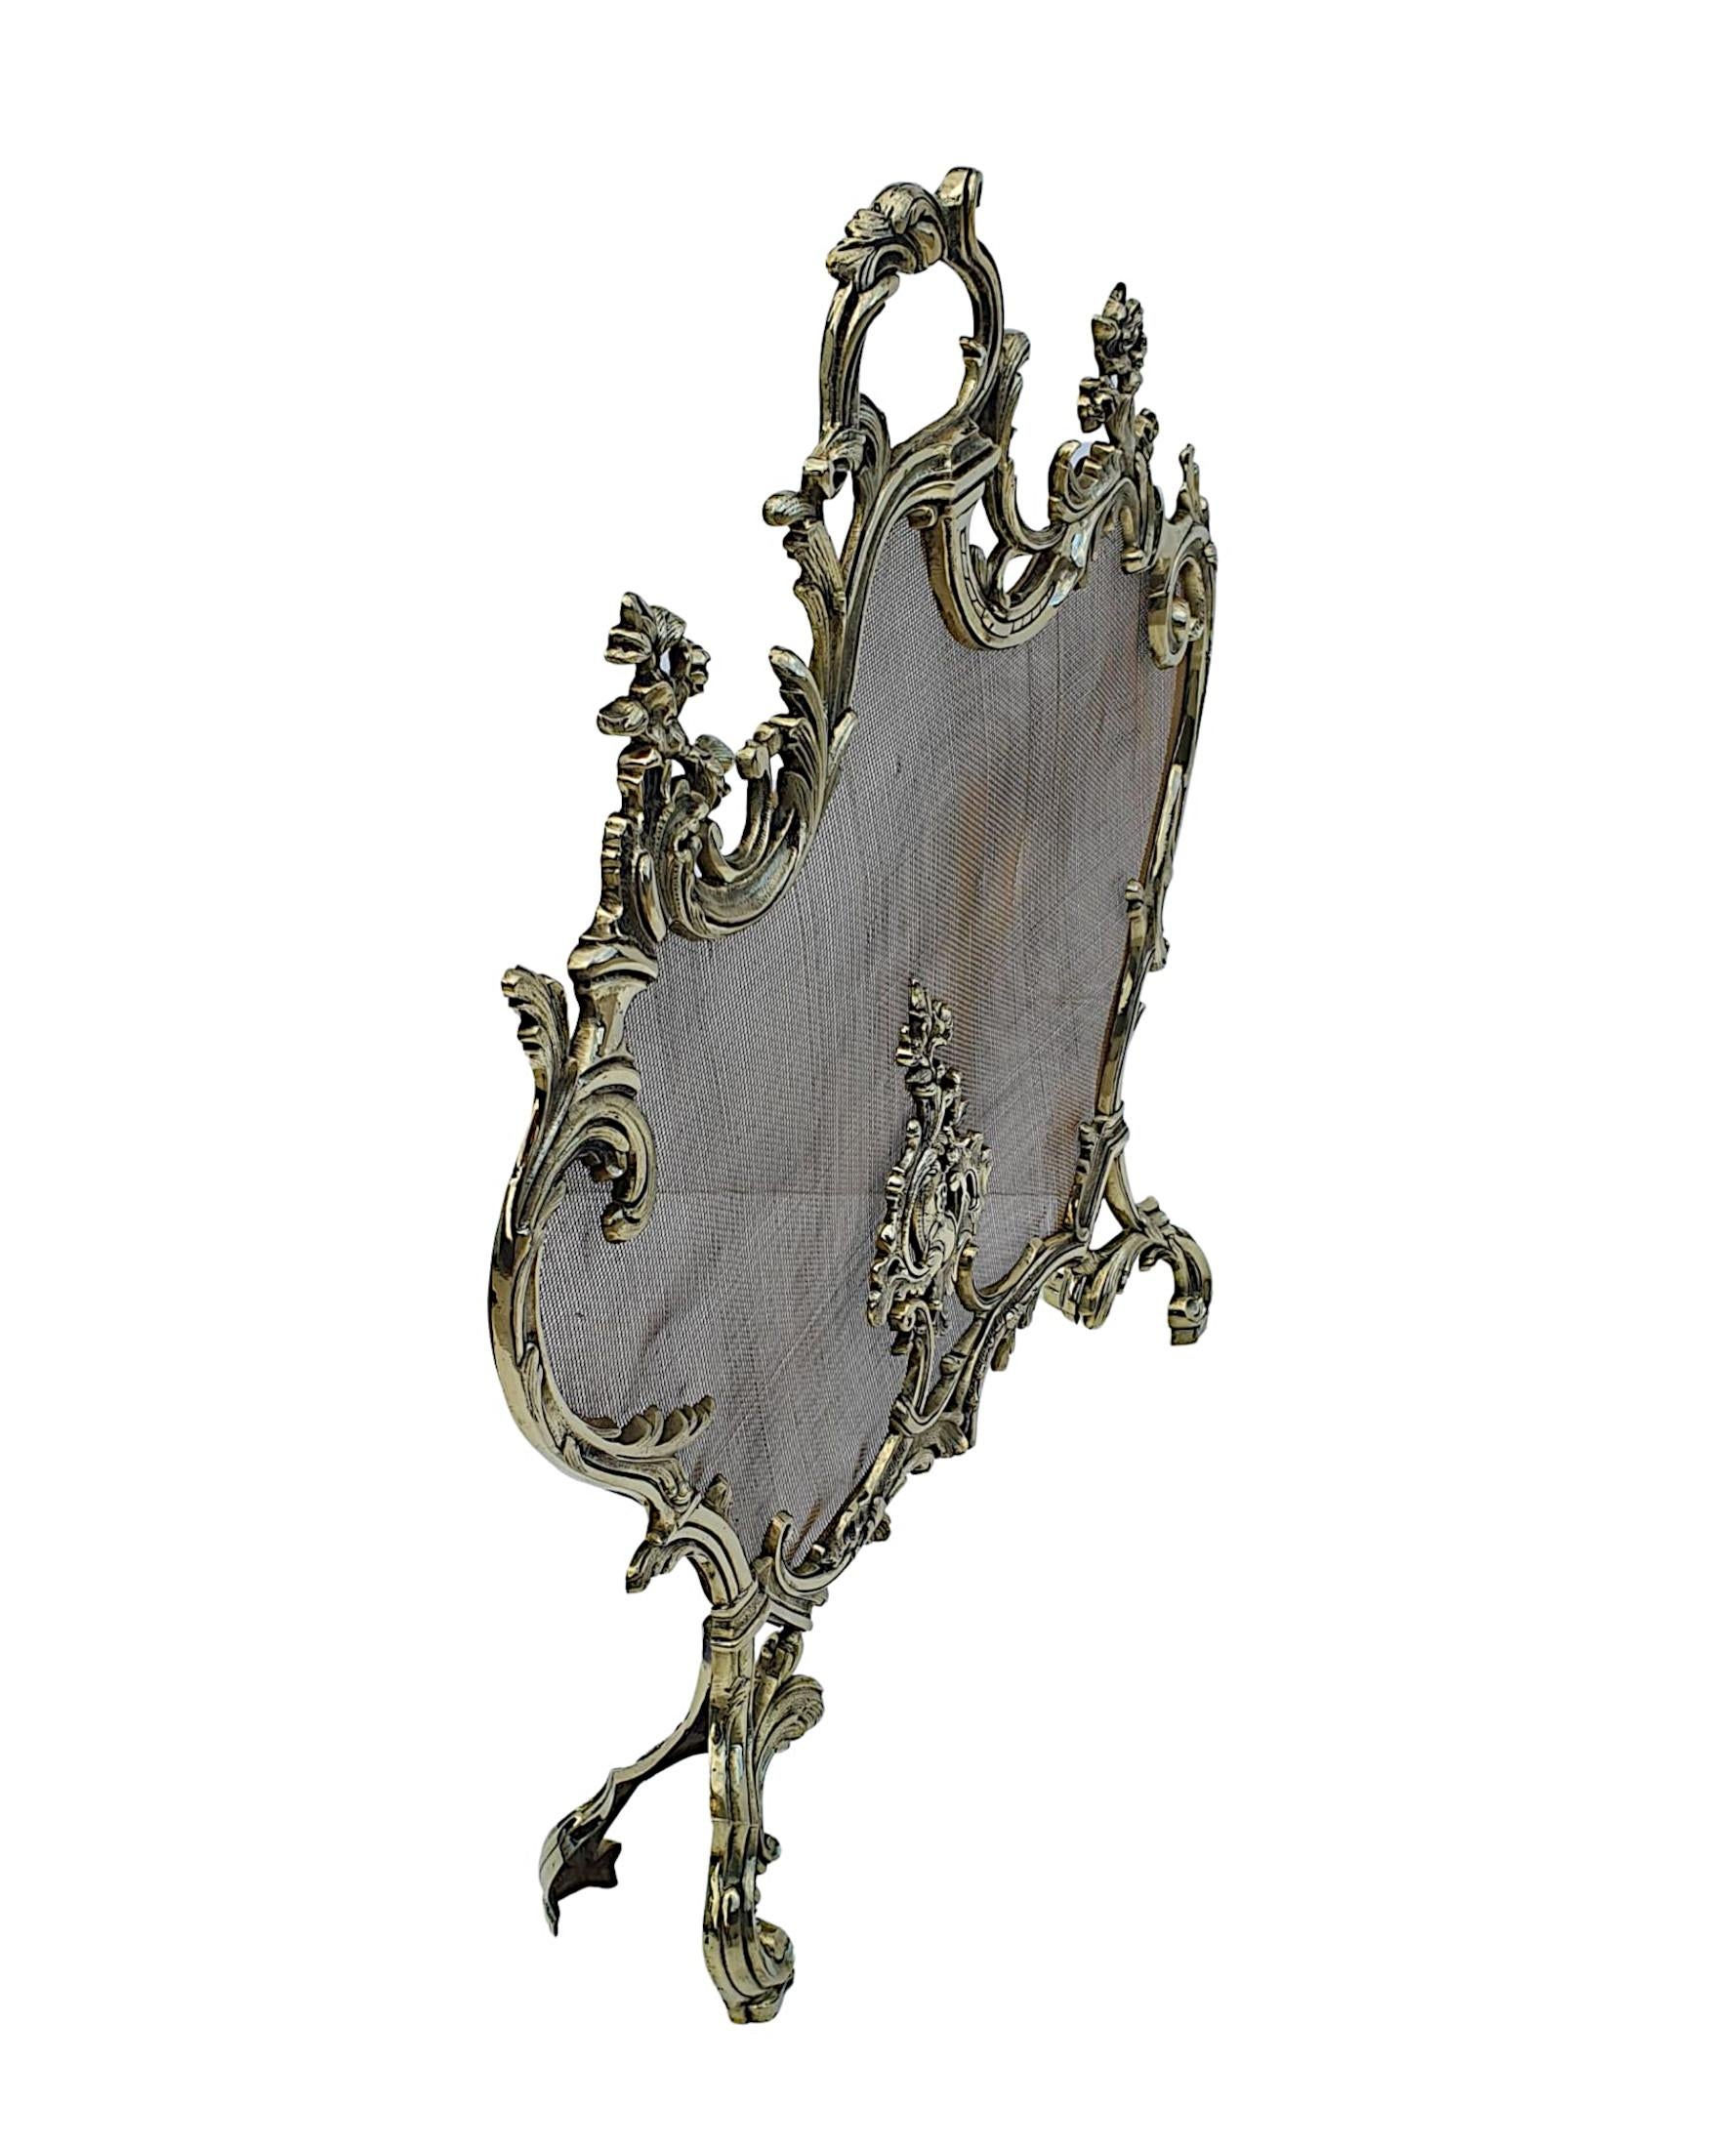 An elegant 19th Century fully restored brass fires creen in the Rococo manner. The shaped wire mesh is set within a beautifully cast pierced brass frame with intricate scrolling foliate, flowerheads, s and c scroll motif detail throughtout,